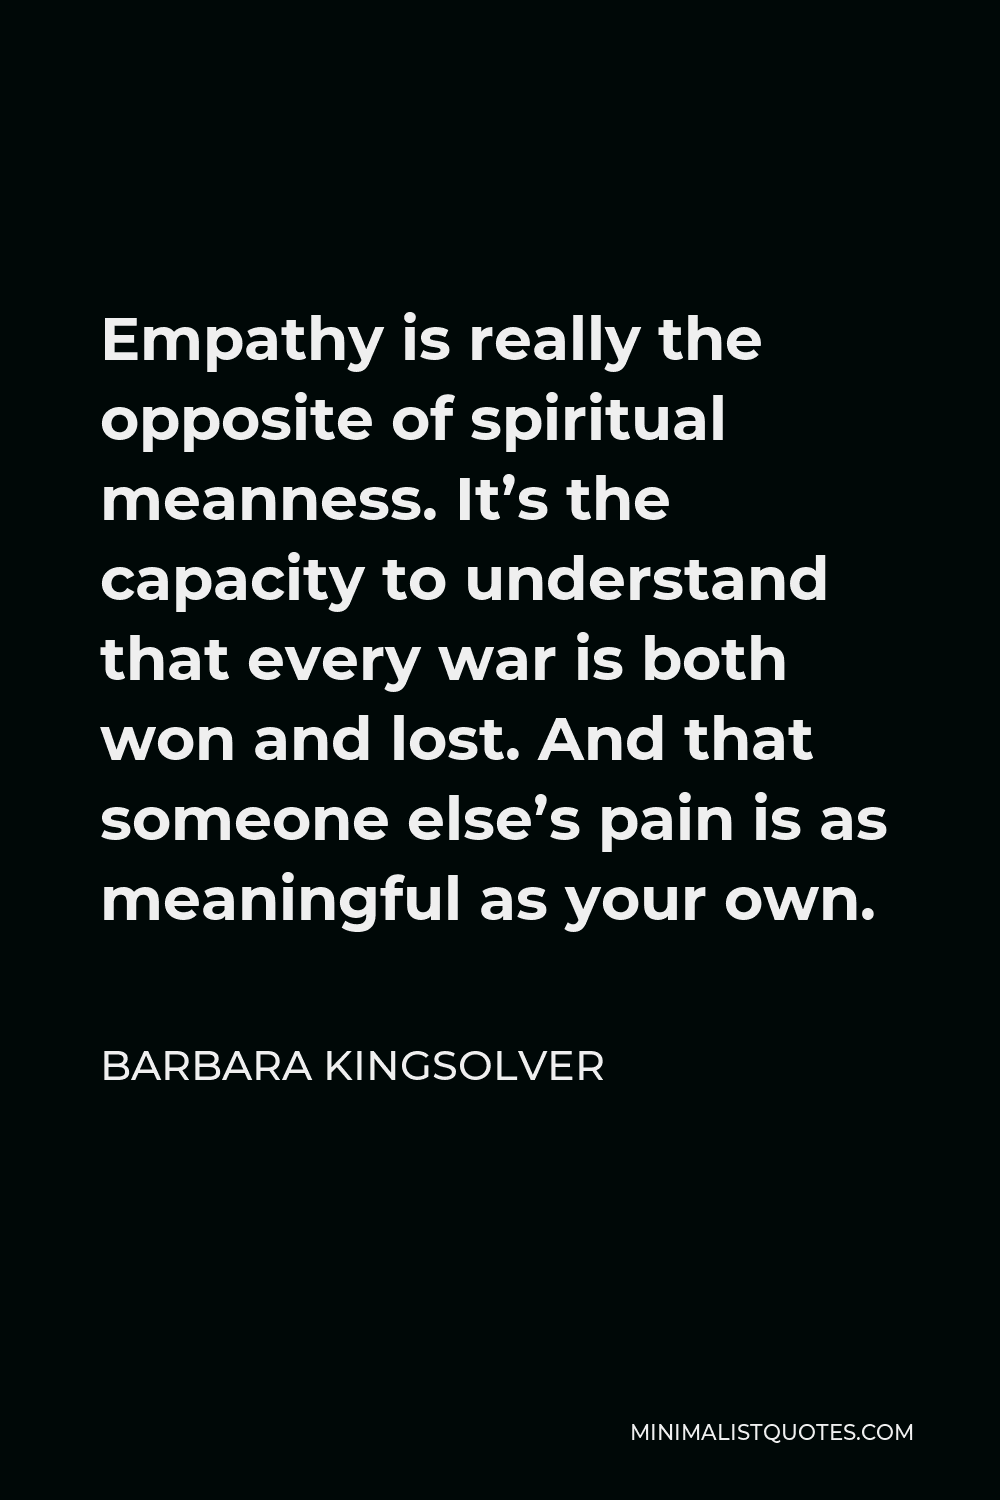 Barbara Kingsolver Quote - Empathy is really the opposite of spiritual meanness. It’s the capacity to understand that every war is both won and lost. And that someone else’s pain is as meaningful as your own.